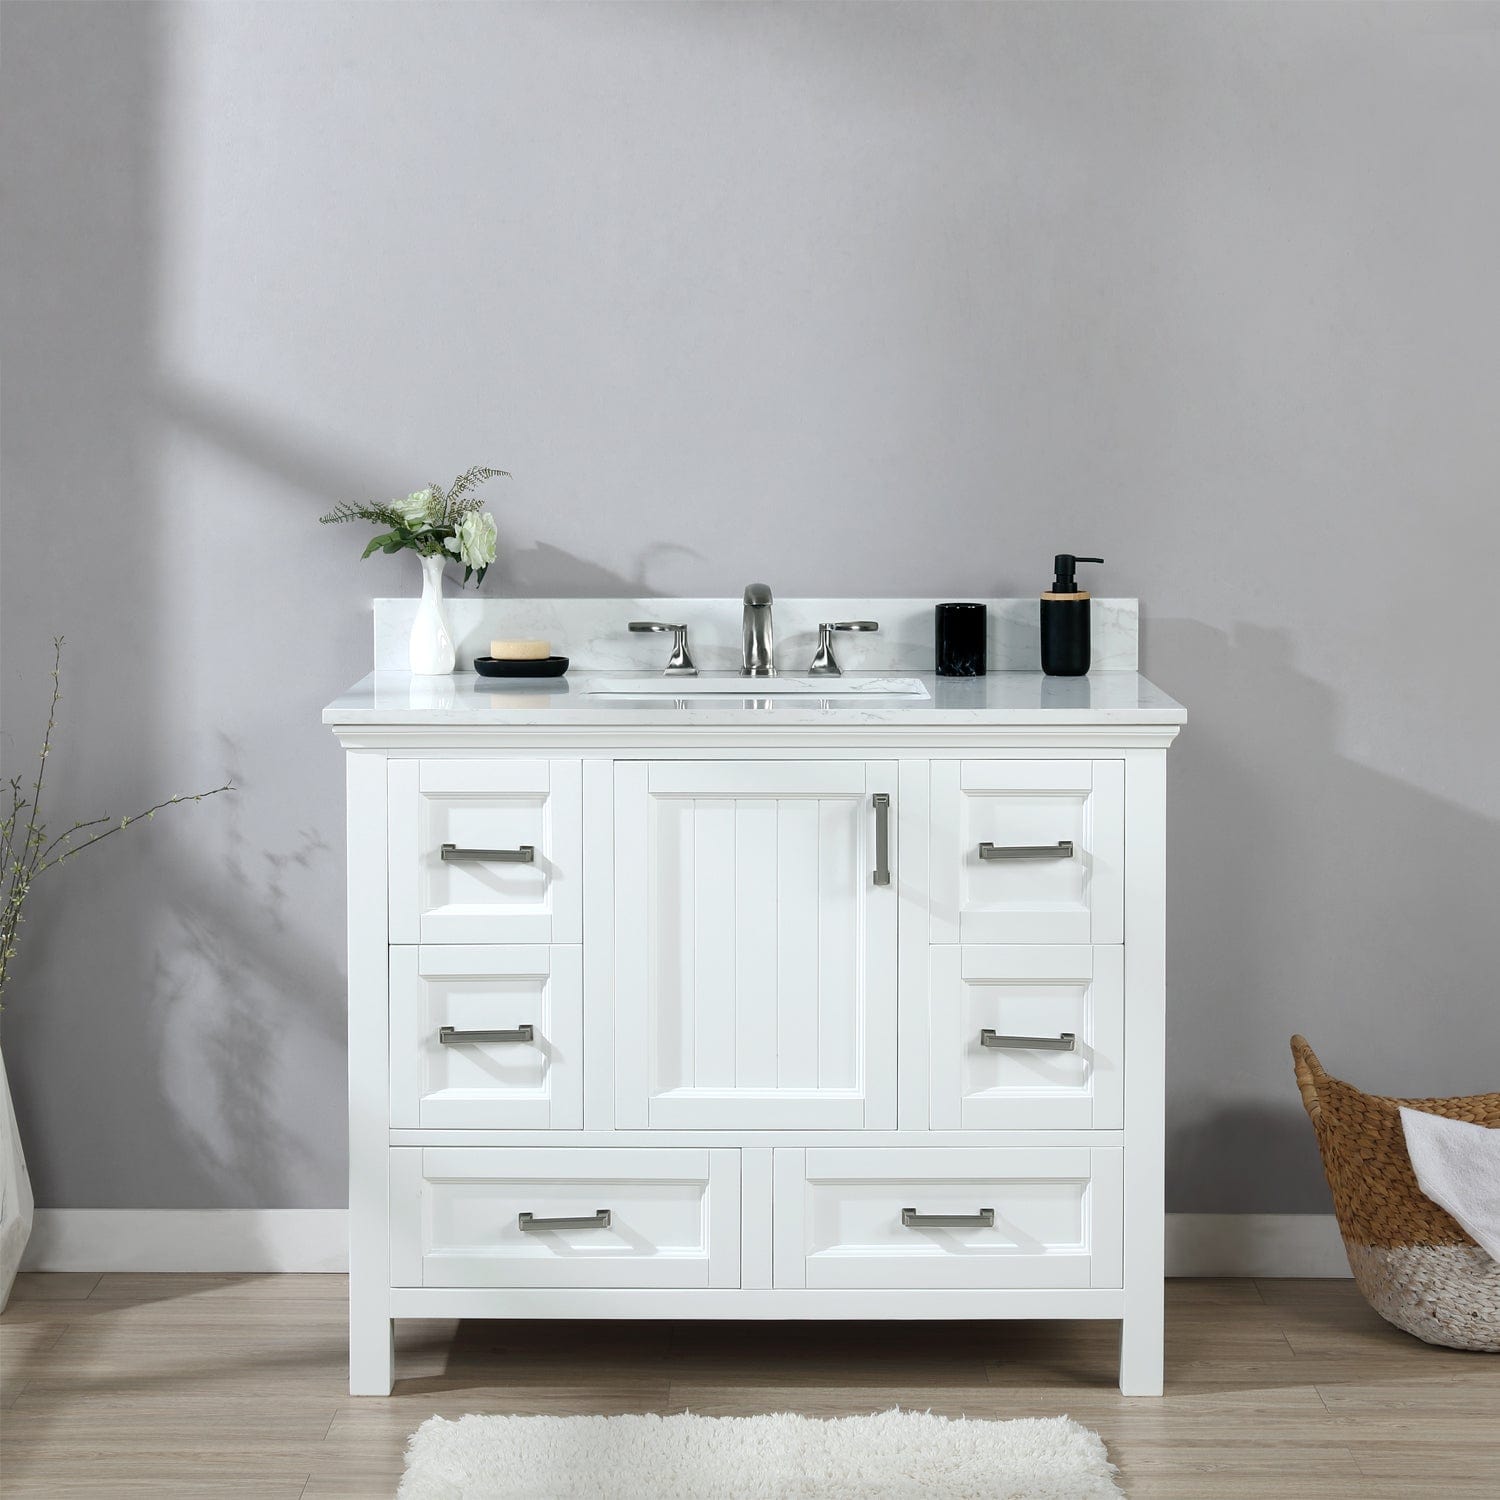 Altair Isla 42" Single Bathroom Vanity Set in White and Carrara White Marble Countertop without Mirror 538042-WH-AW-NM - Molaix696952511345Vanity538042-WH-AW-NM